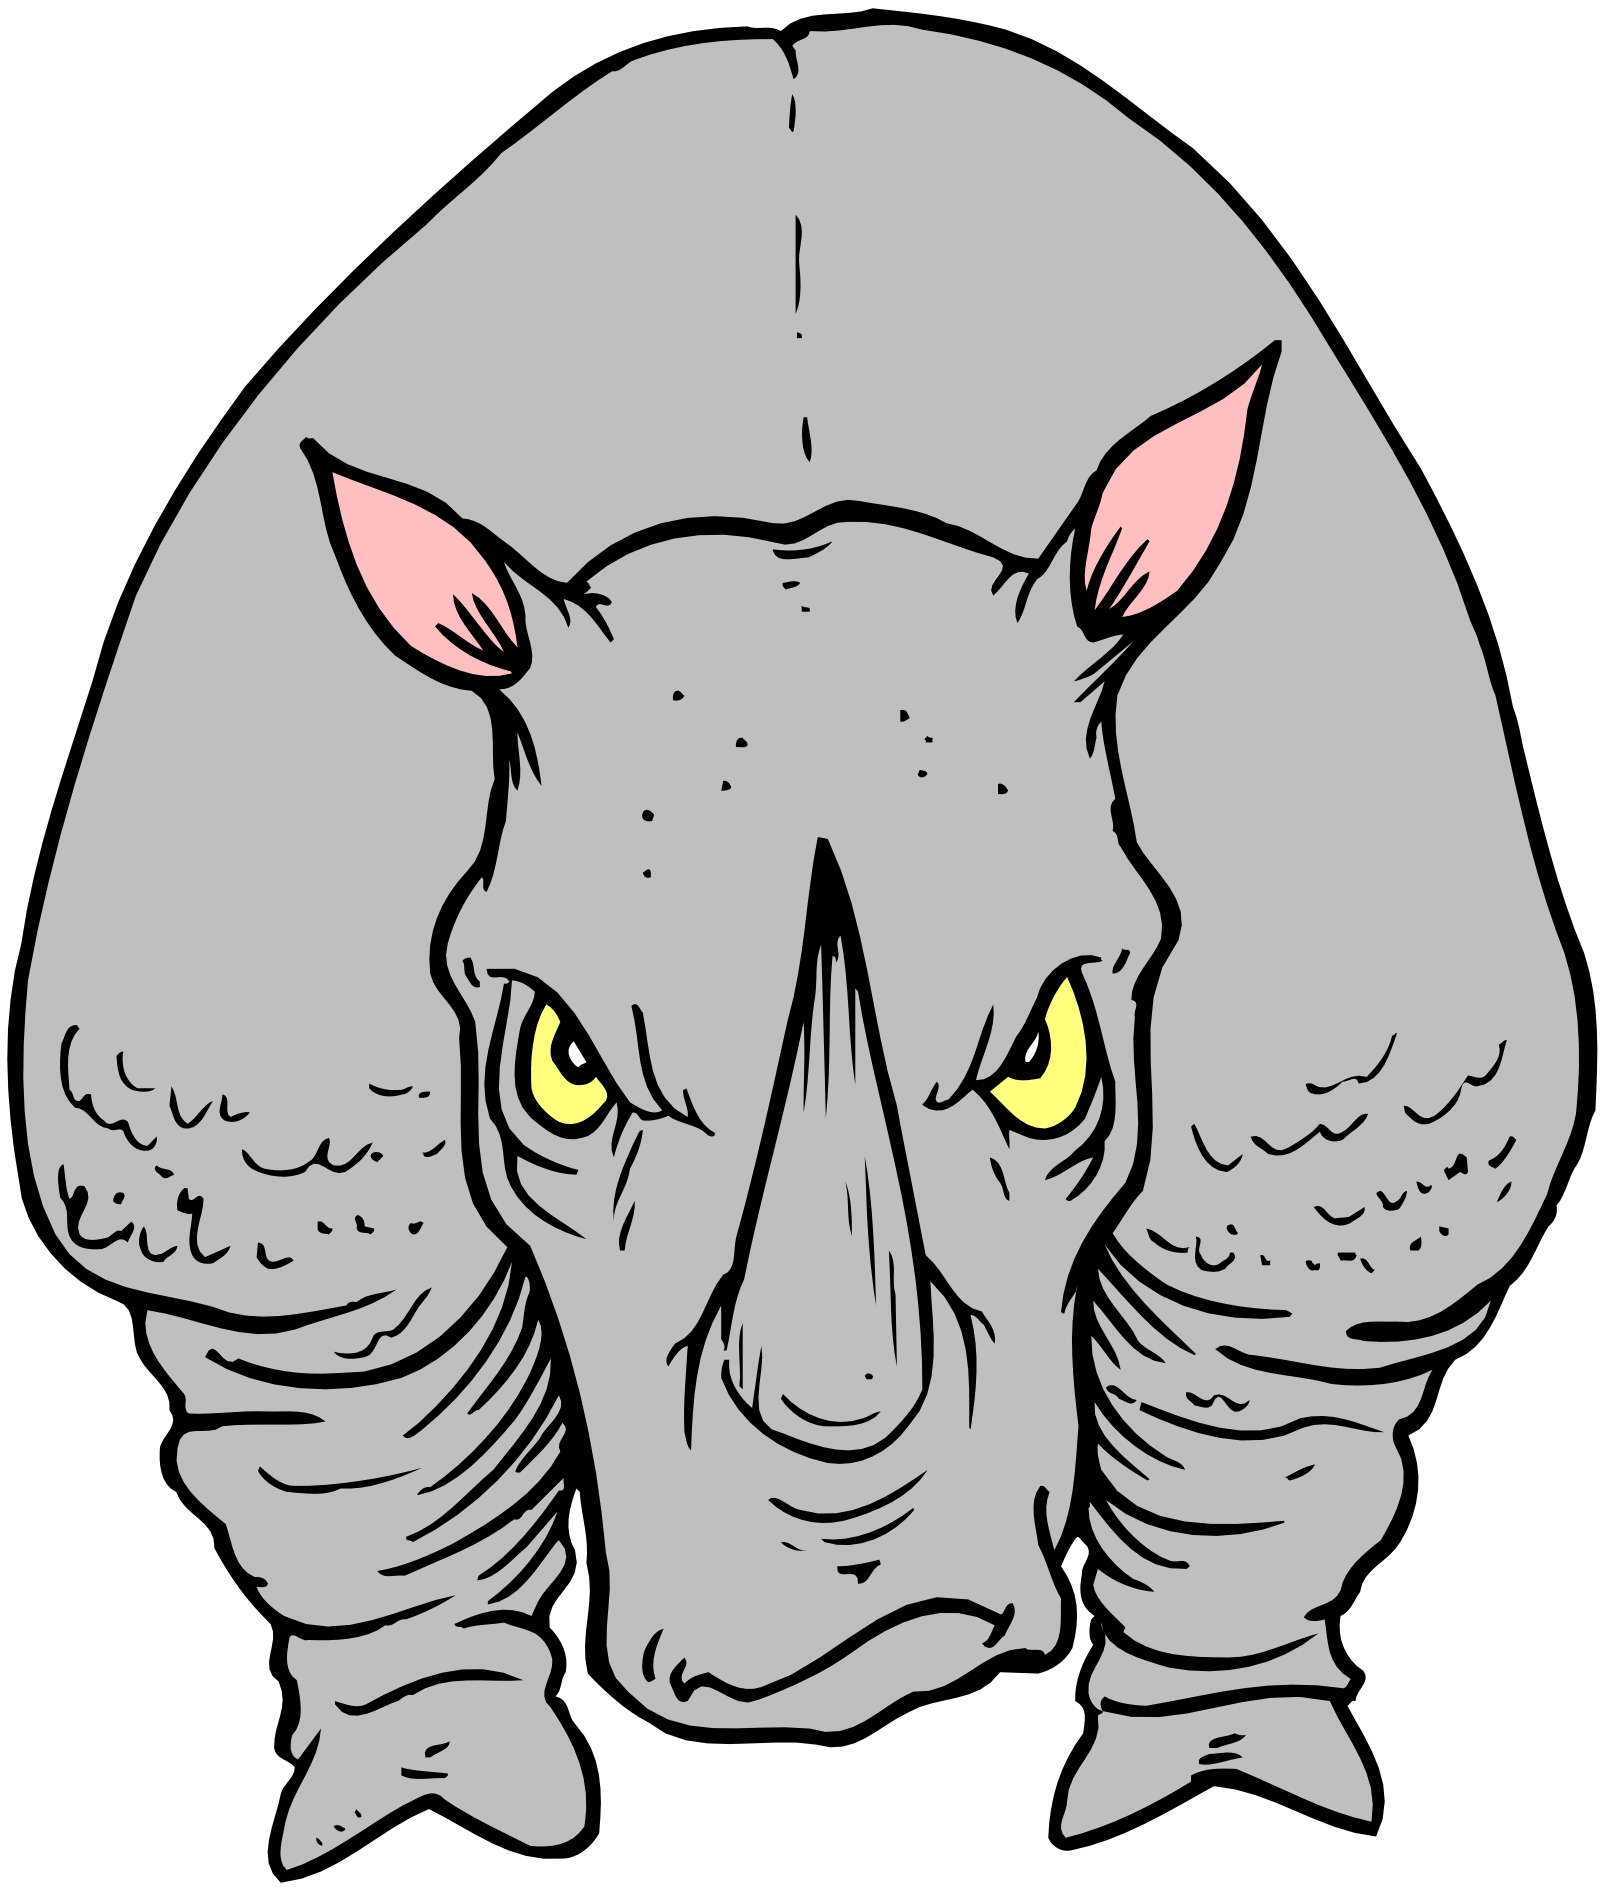 Rhino Cartoon Character Images  Pictures - Becuo